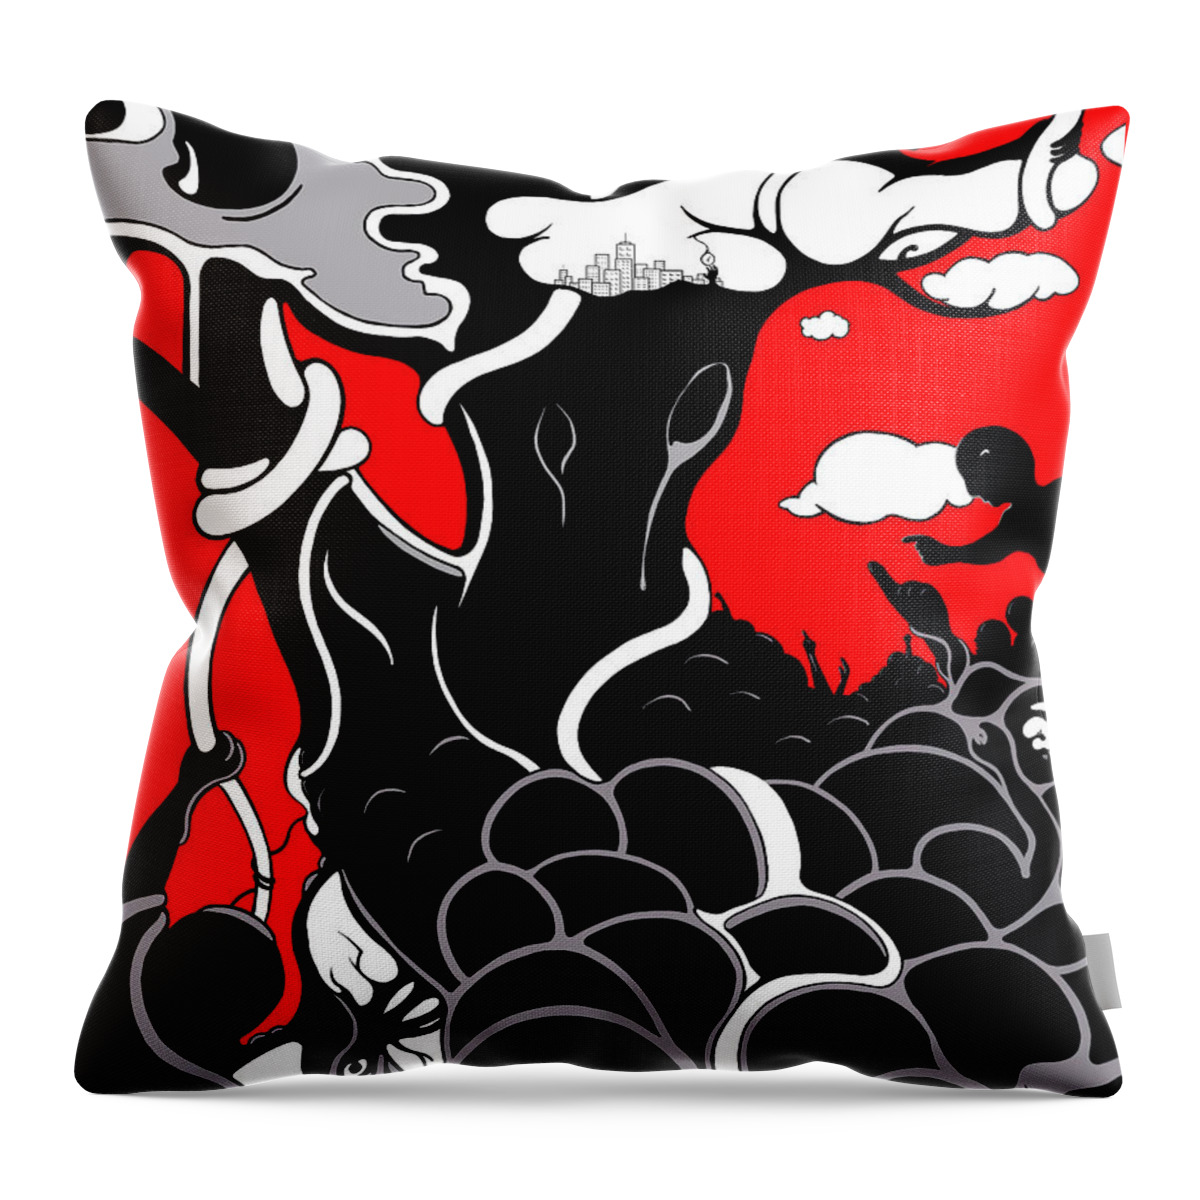 Female Throw Pillow featuring the digital art Strife by Craig Tilley